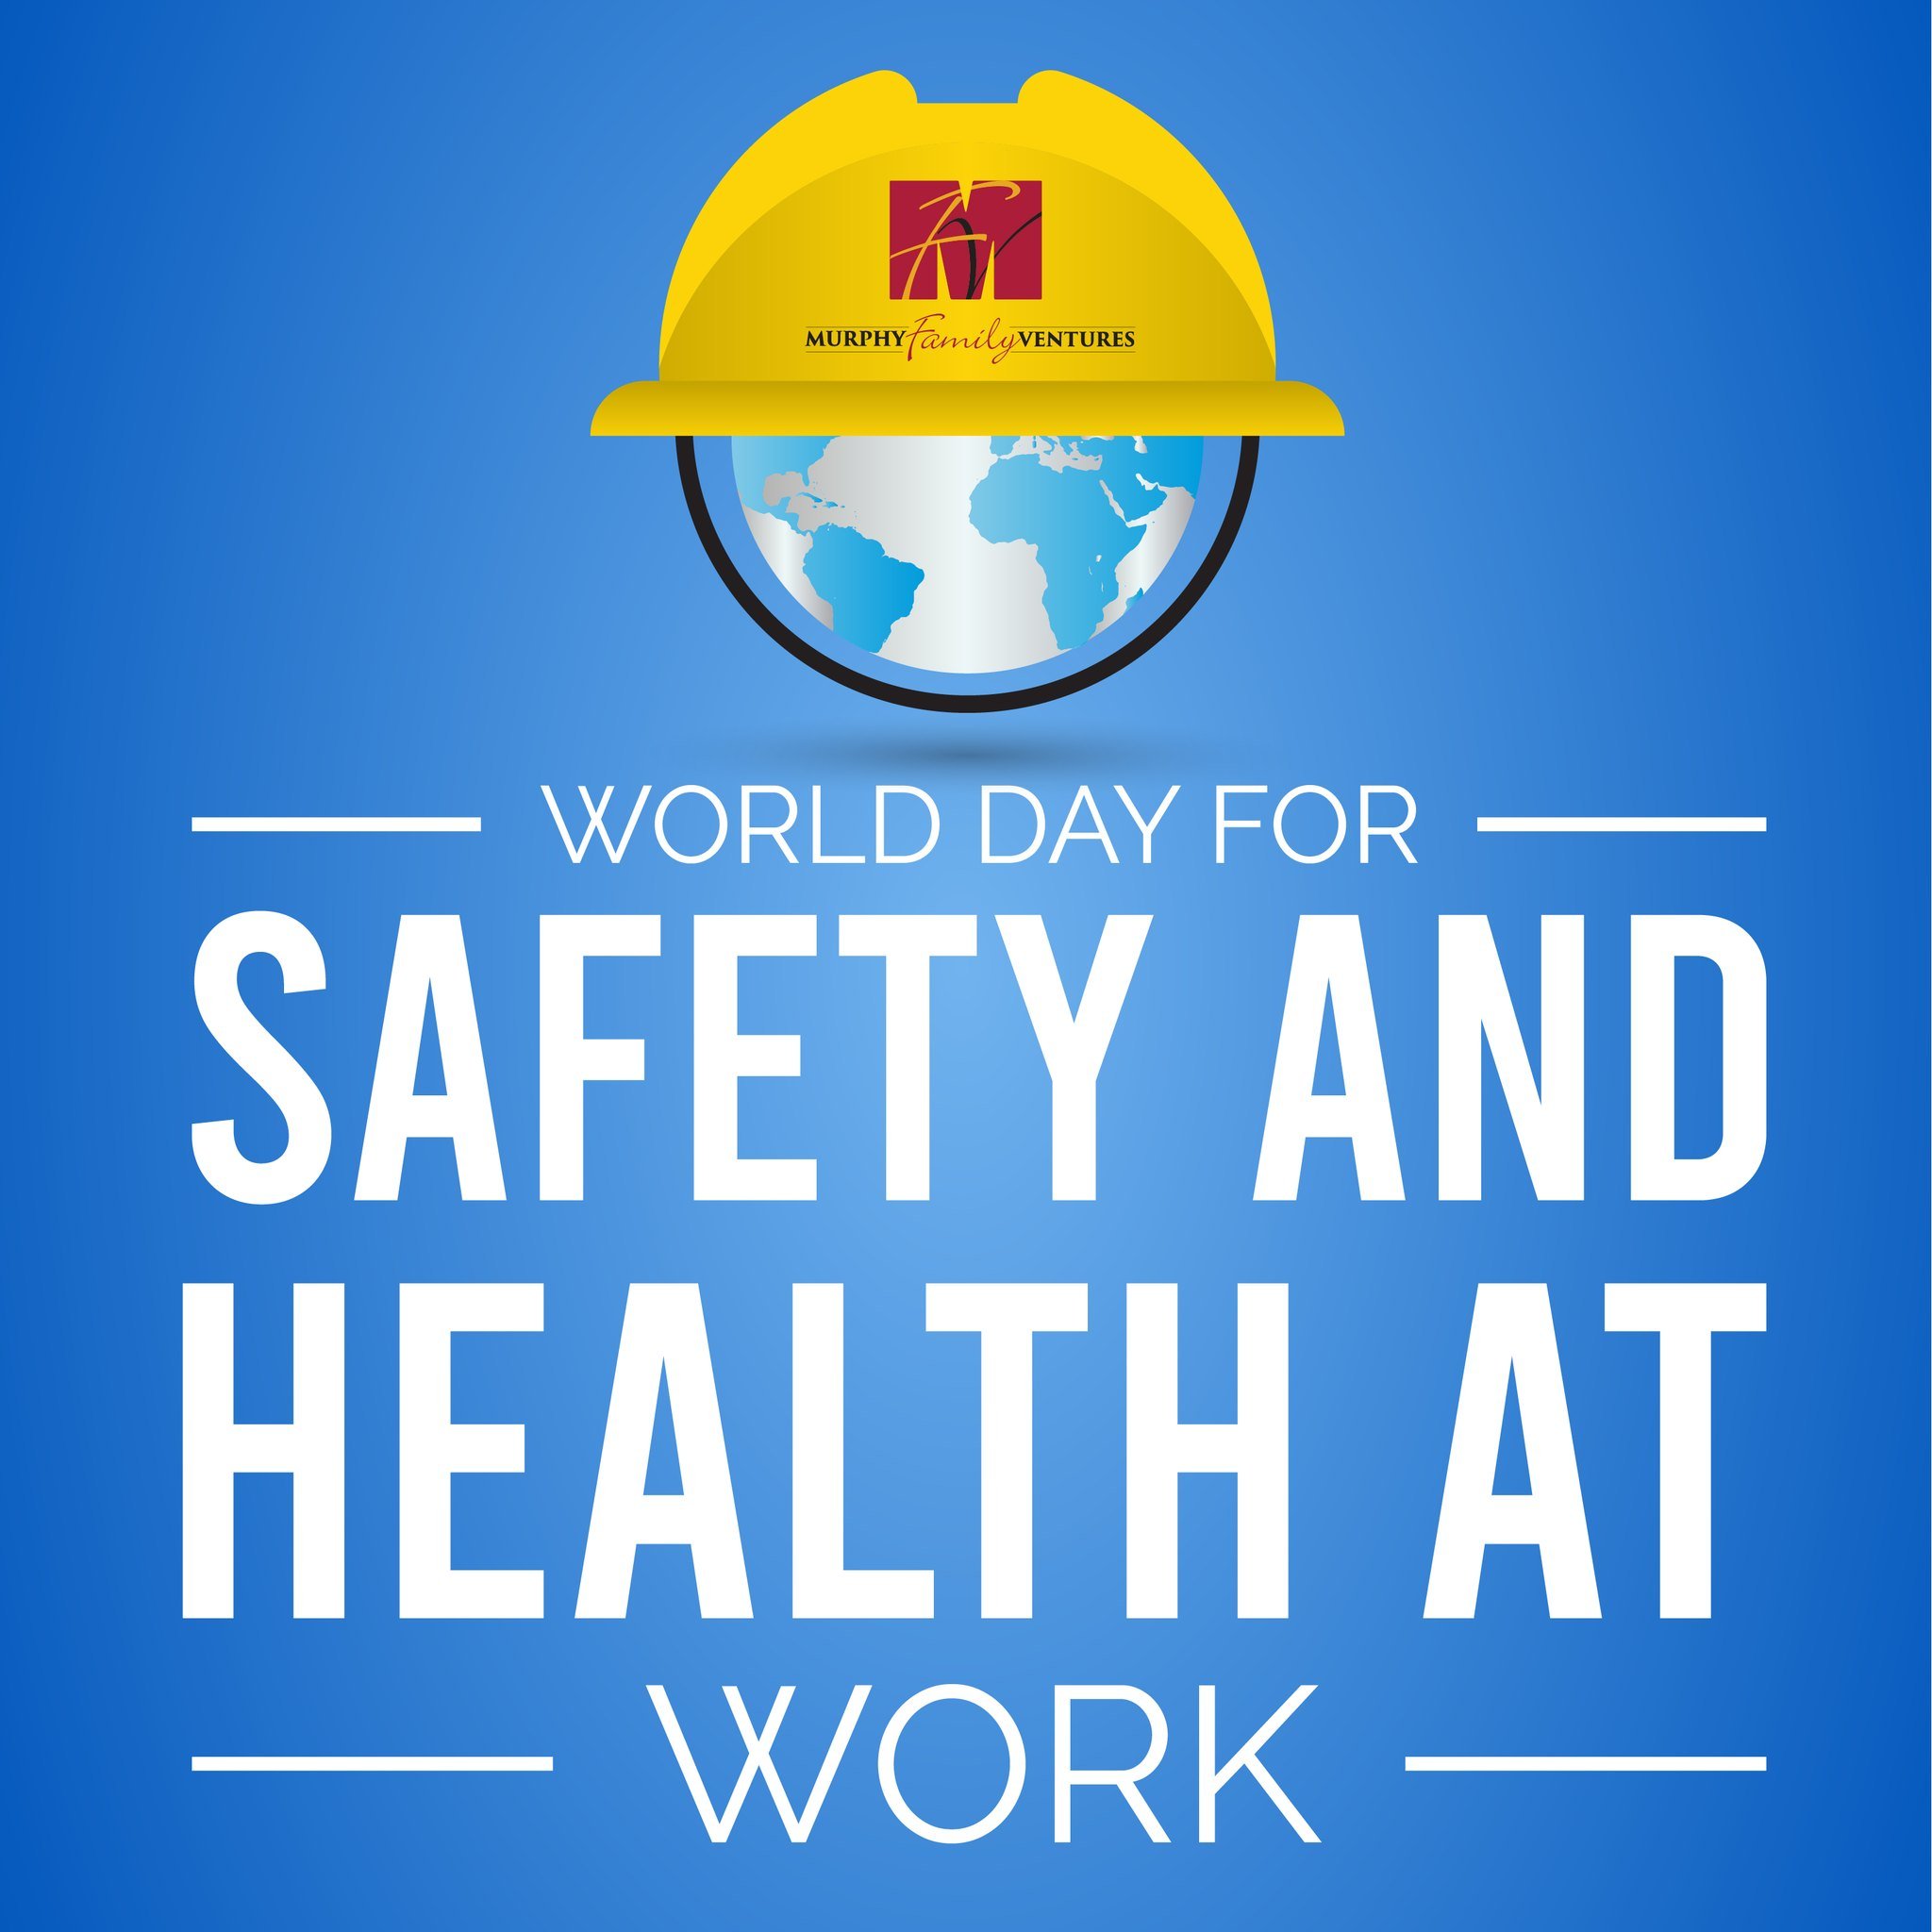 Happy World Day for Safety and Health at Work! Make sure to check out the latest Safety Topic from Mike Brown on Positively MFV! Link in bio.